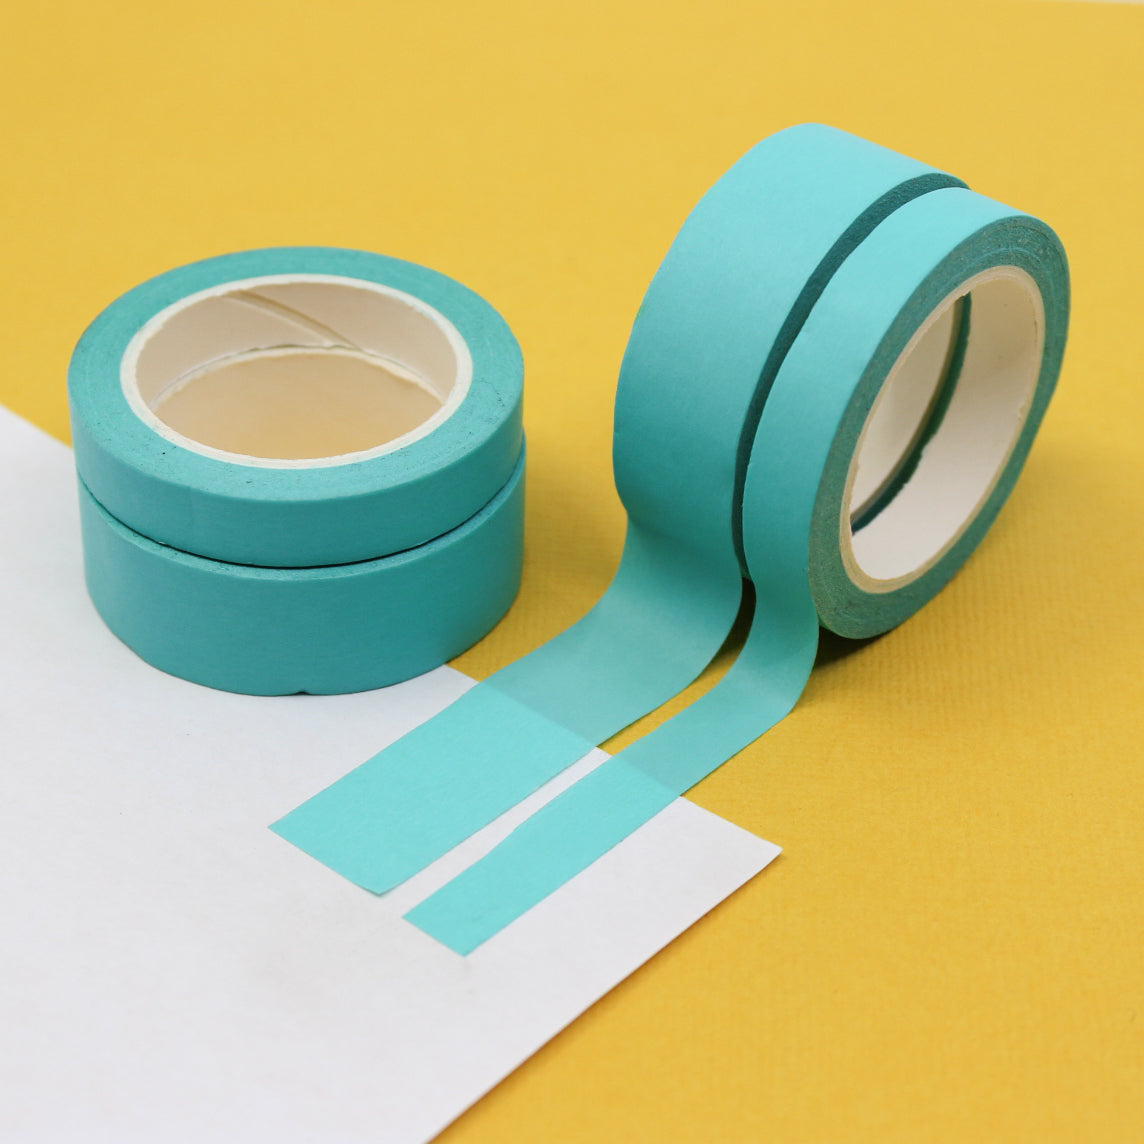 This pastel aqua blue washi tape is vibrant and fun. This washi tape is part of our solid neon thick-thin matching duo washi collection. Find the perfect color for any project in BBB Supplies' thick-thin solids collection, from neon to neutral to pastel and more.